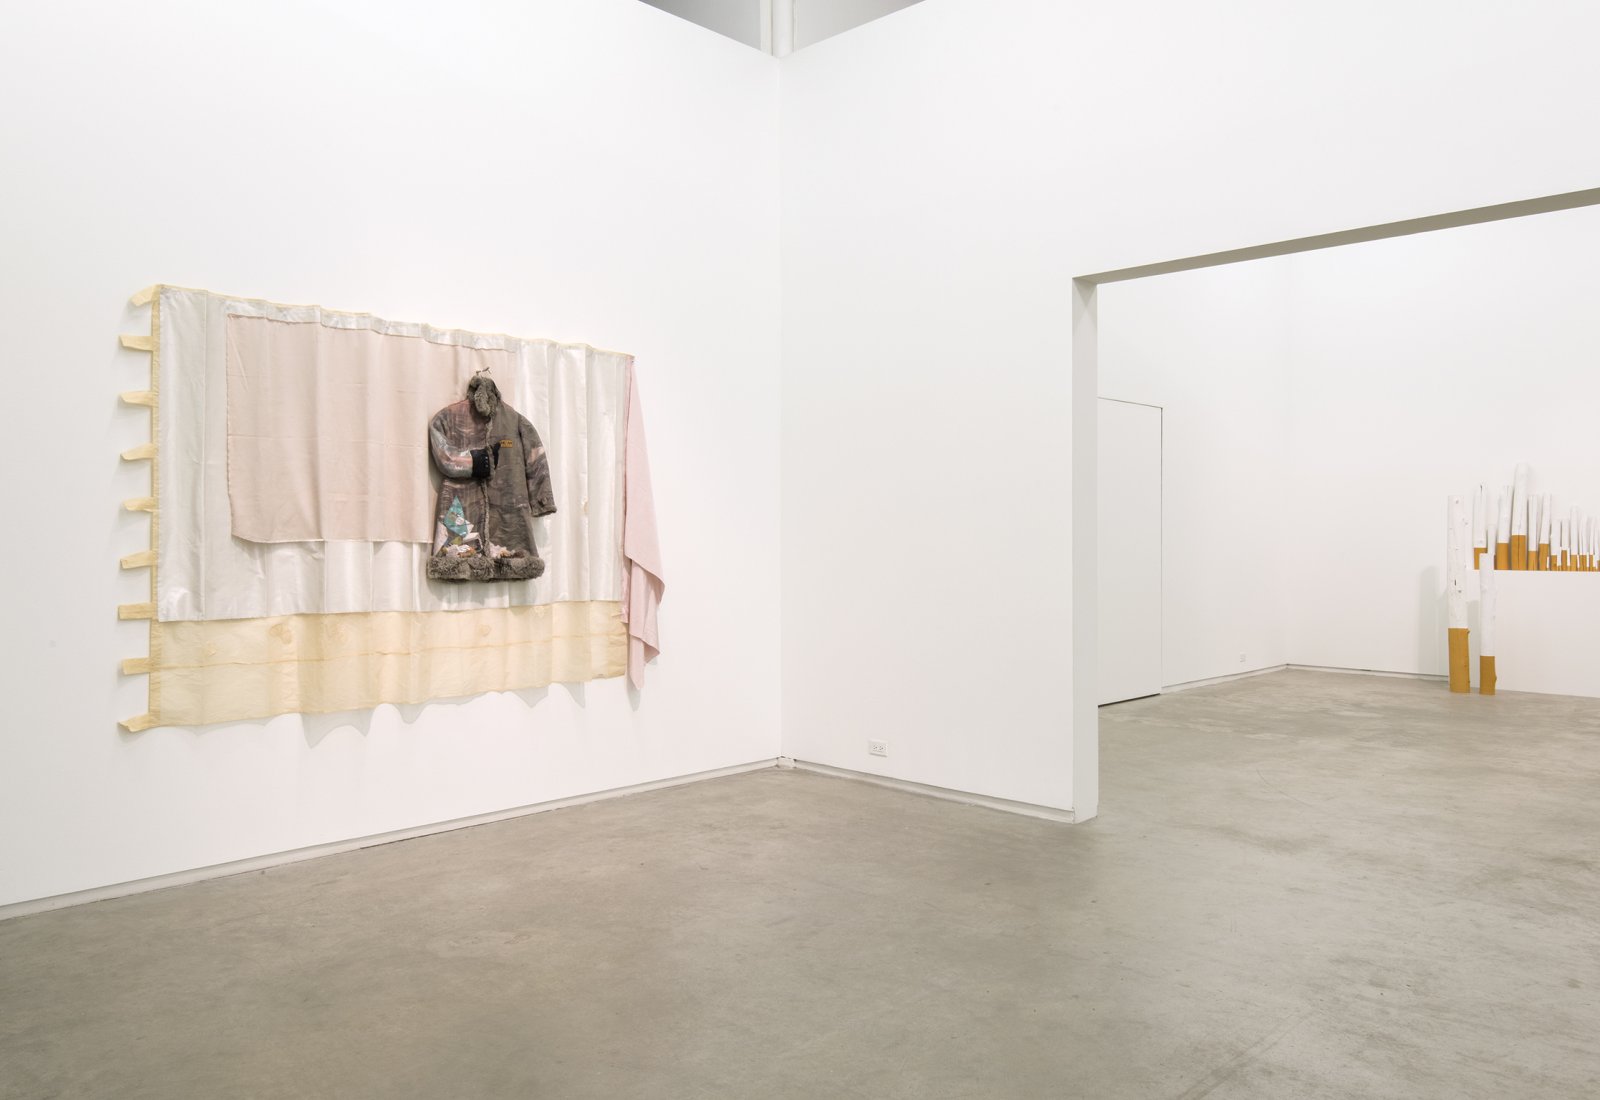 Liz Magor, I is being This, installation view, Catriona Jeffries, 2012 ​​ by Liz Magor